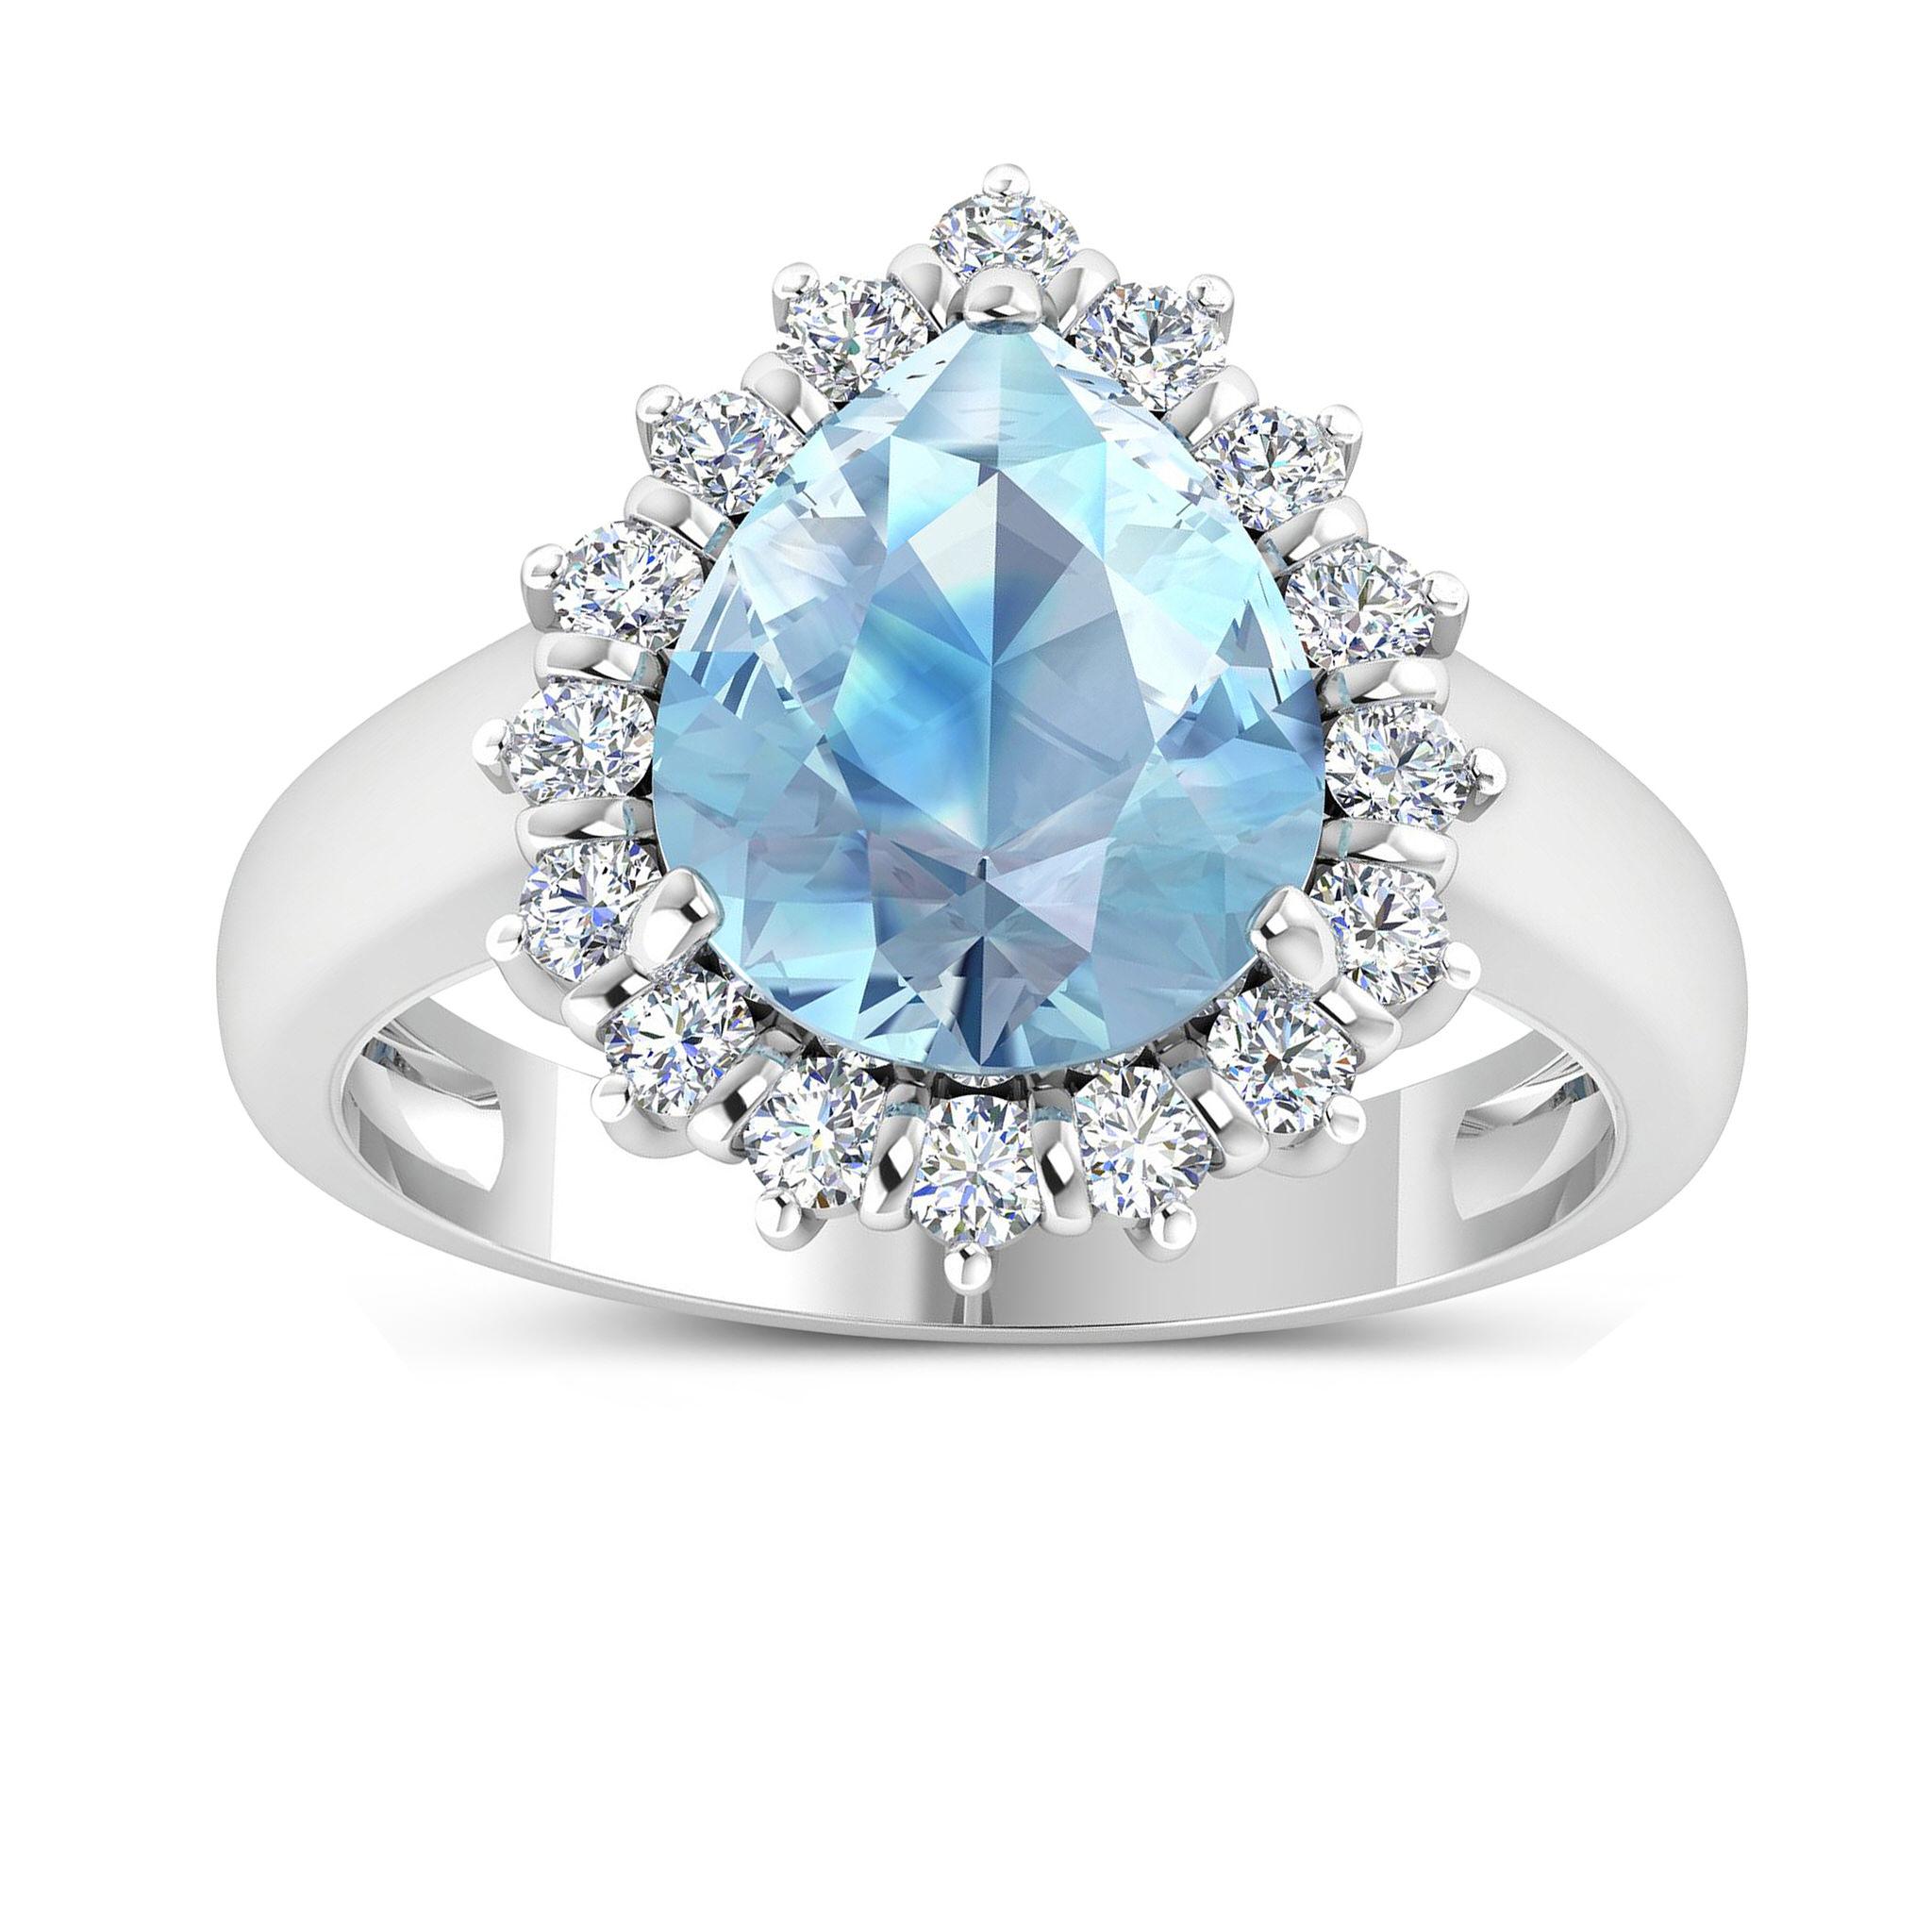 Natural Aquamarine and Diamond Cocktail Ring 2.80 Carats 14k White Gold In Excellent Condition For Sale In Laguna Niguel, CA